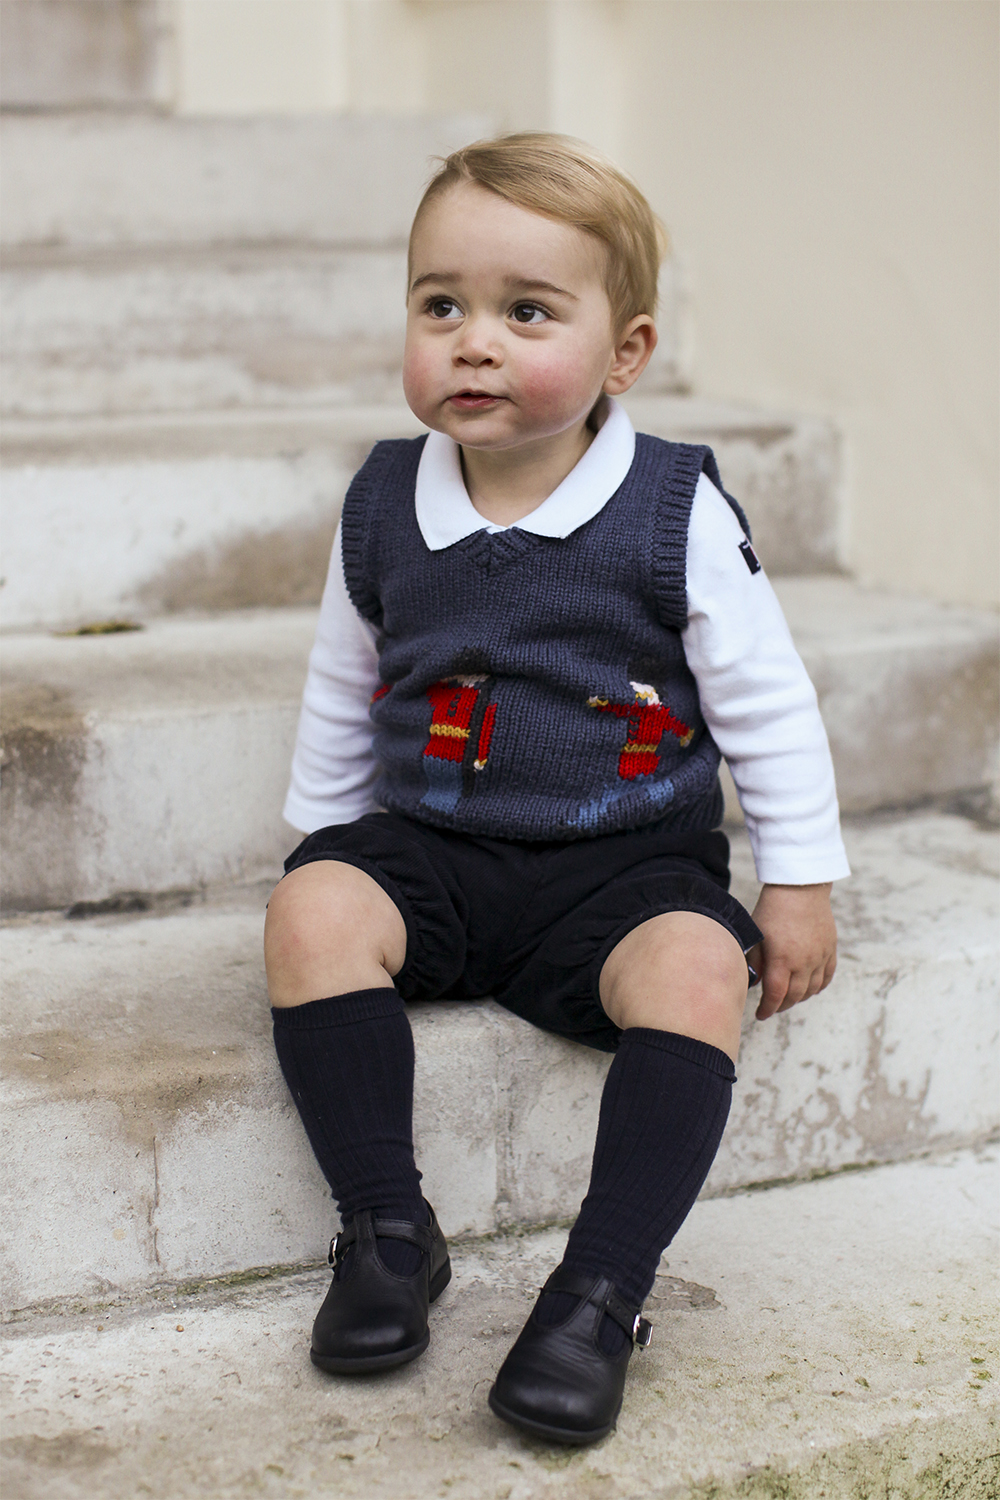 George shows off his cheeky side on the steps of Kensington Palace, during a portrait for the royal Christmas card in December, 2014.